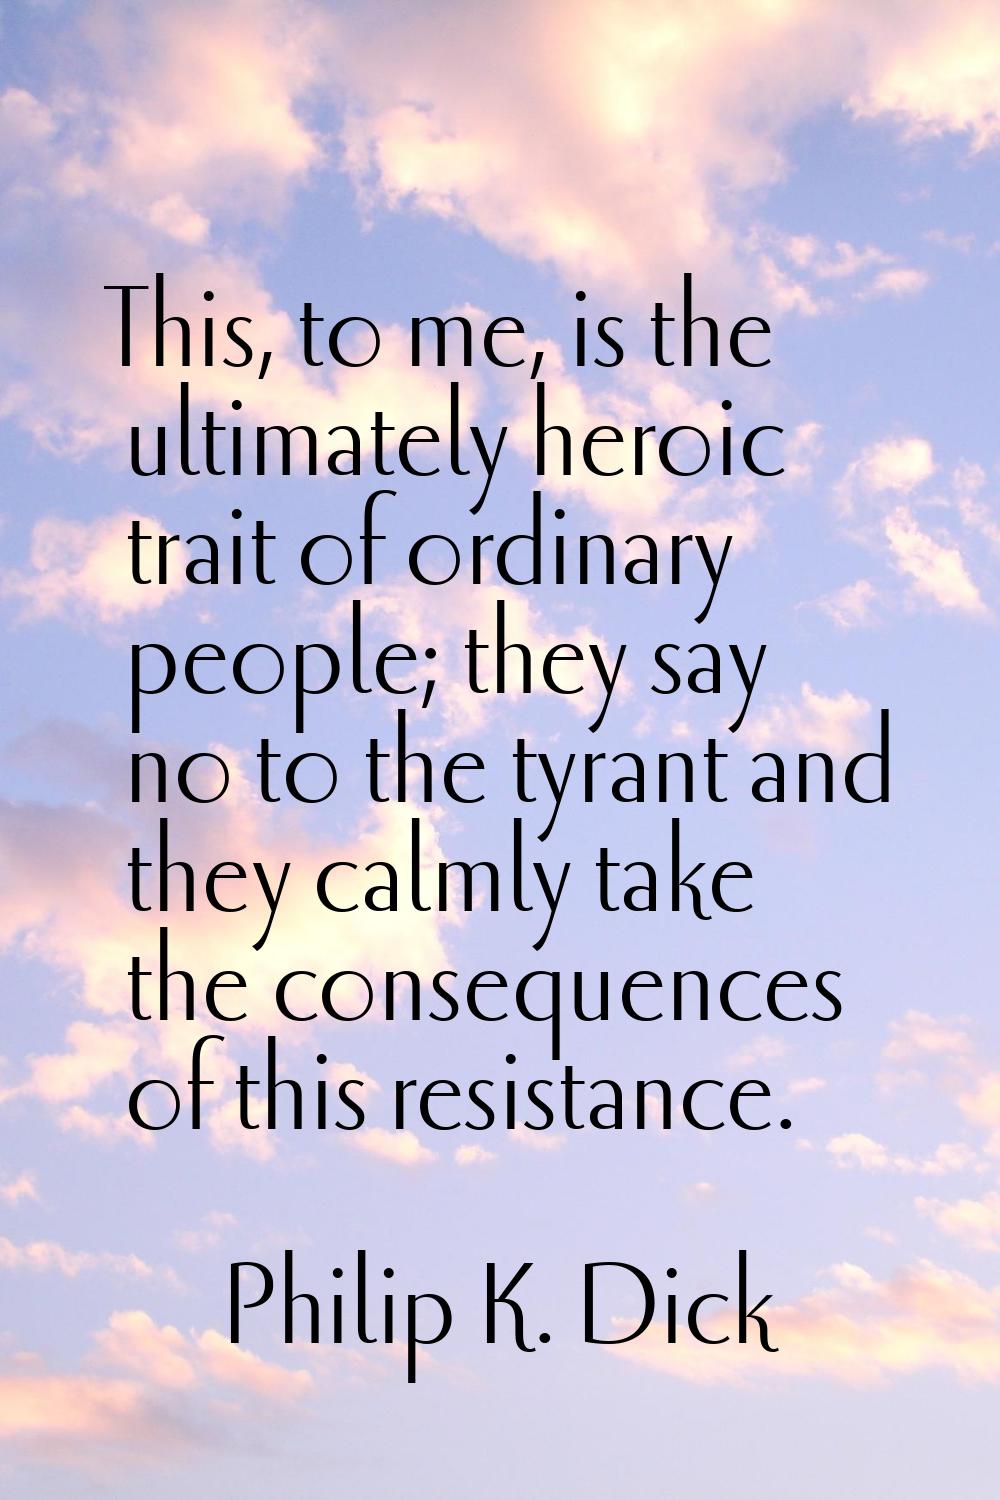 This, to me, is the ultimately heroic trait of ordinary people; they say no to the tyrant and they 